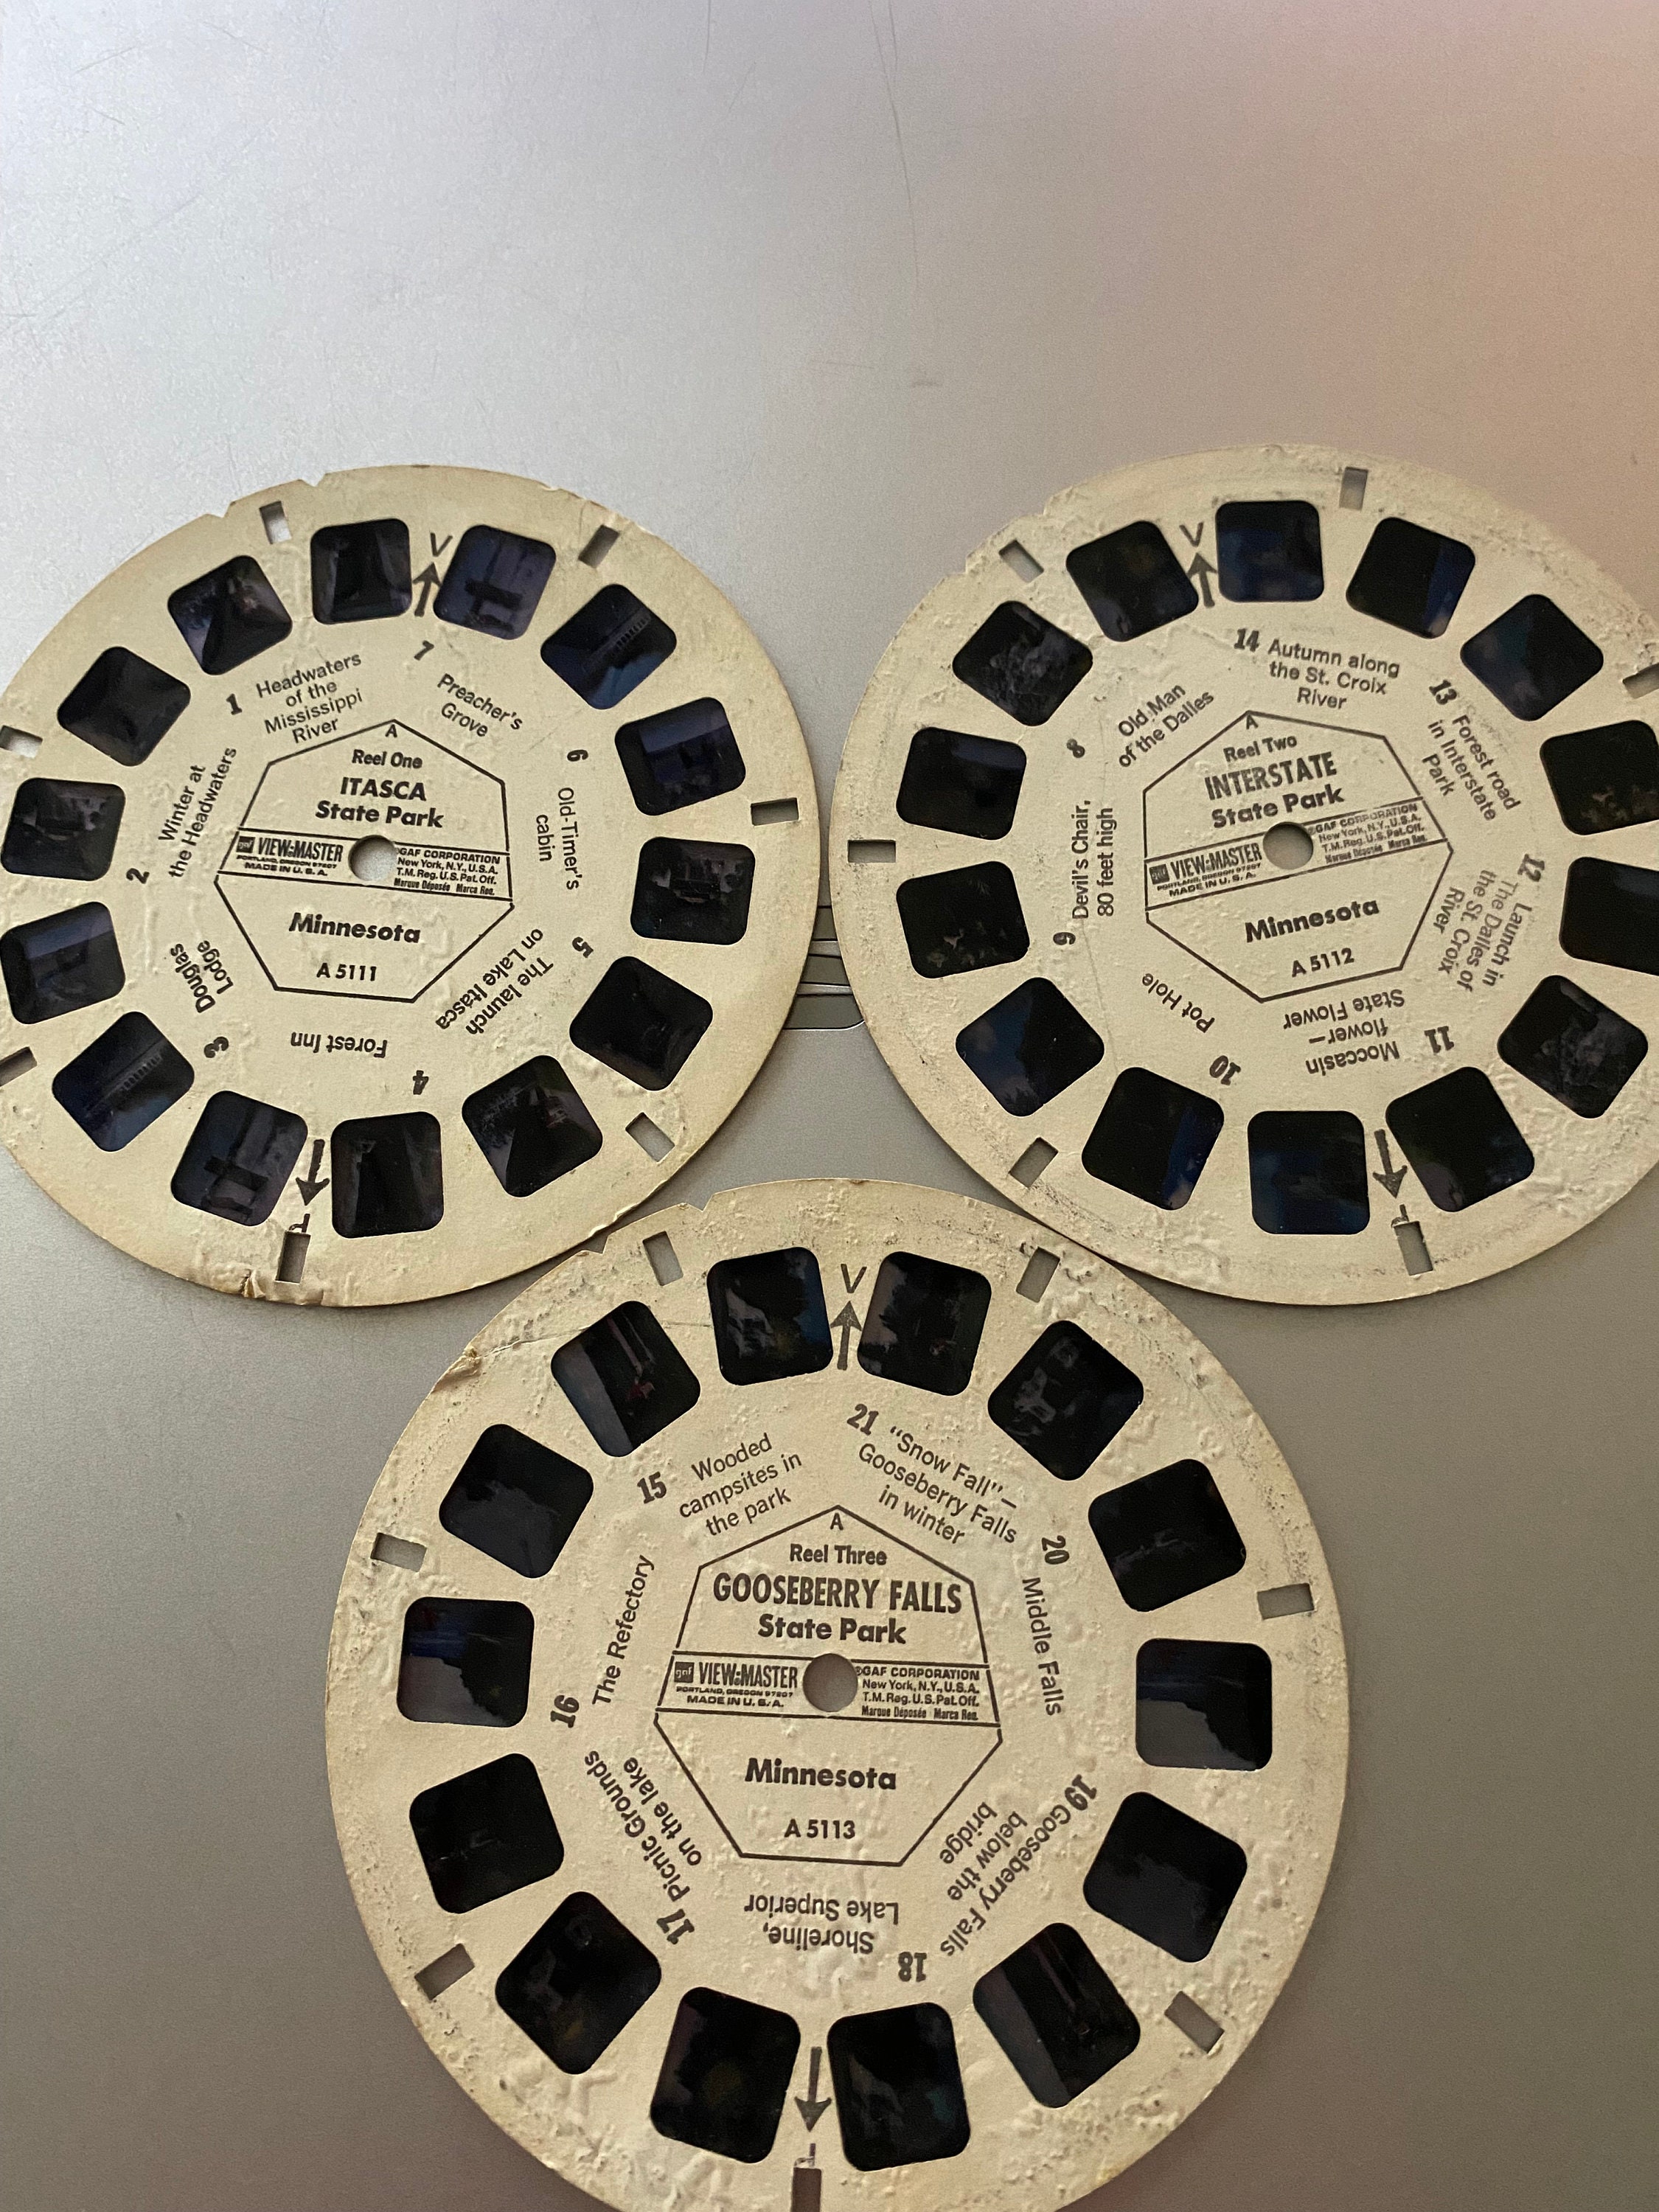 Vintage View Master Reel, View Master Disk, View Master, View